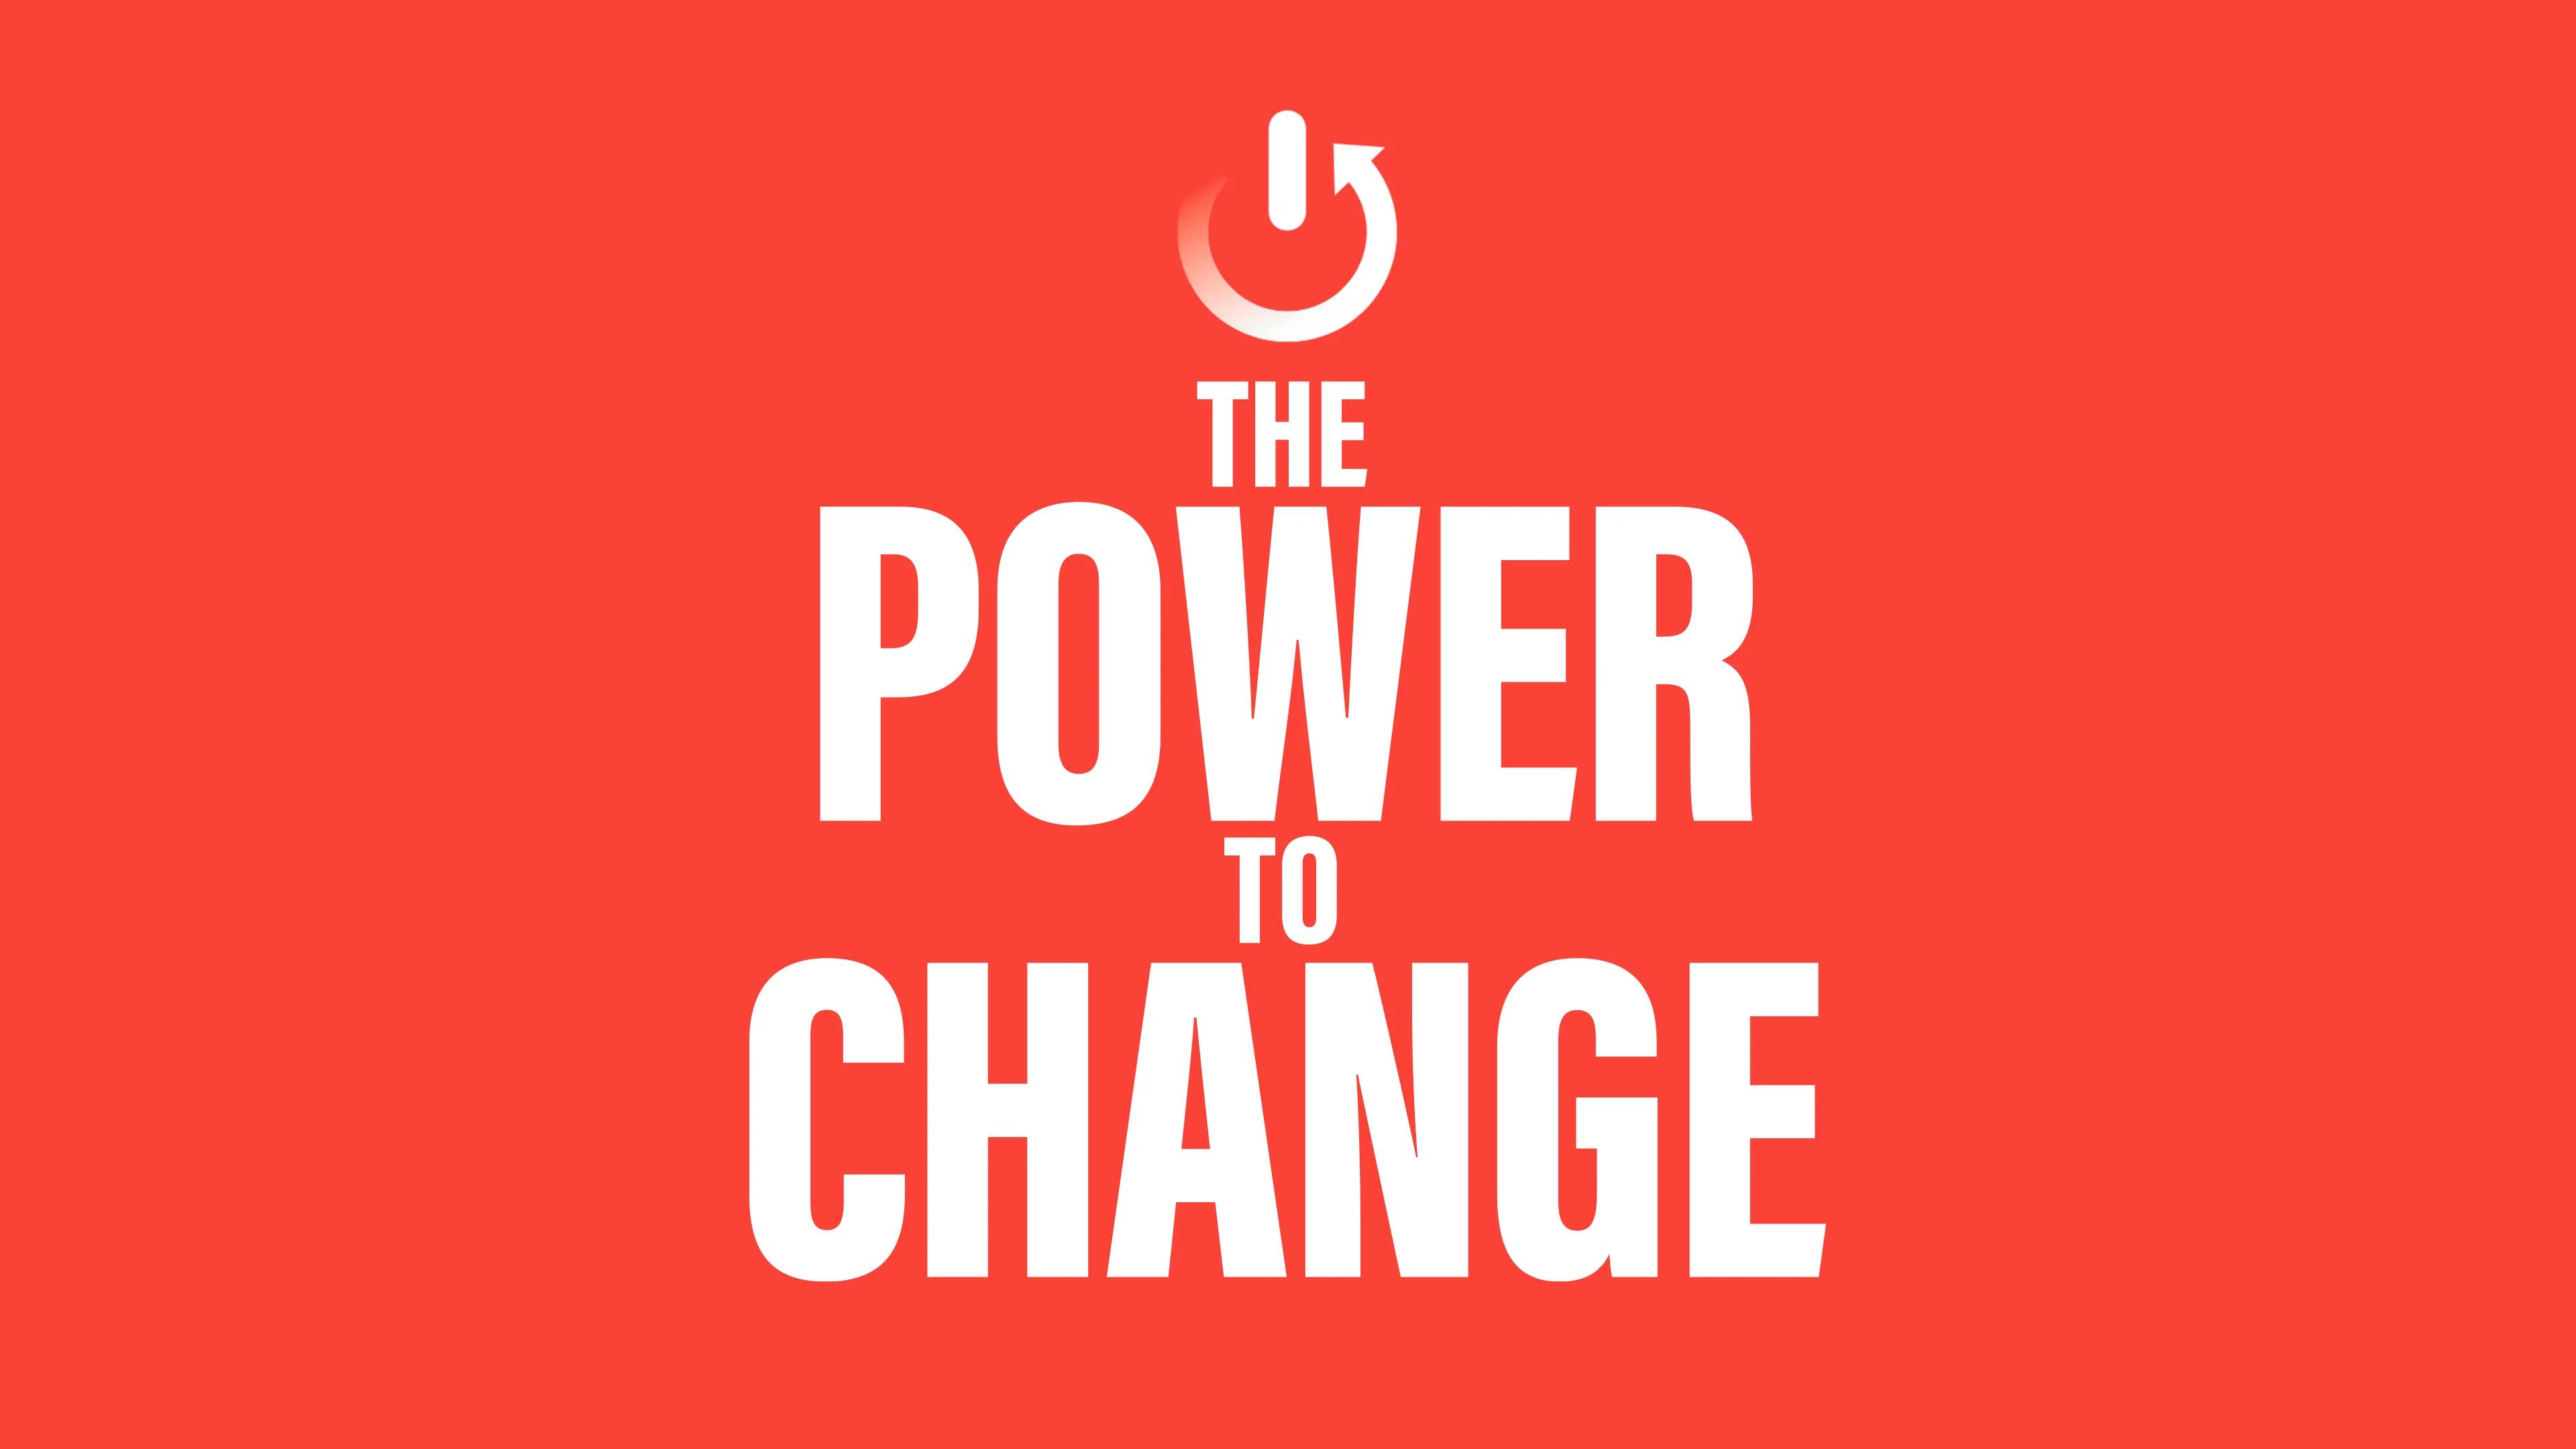 A red background with "the power to change" written on it.